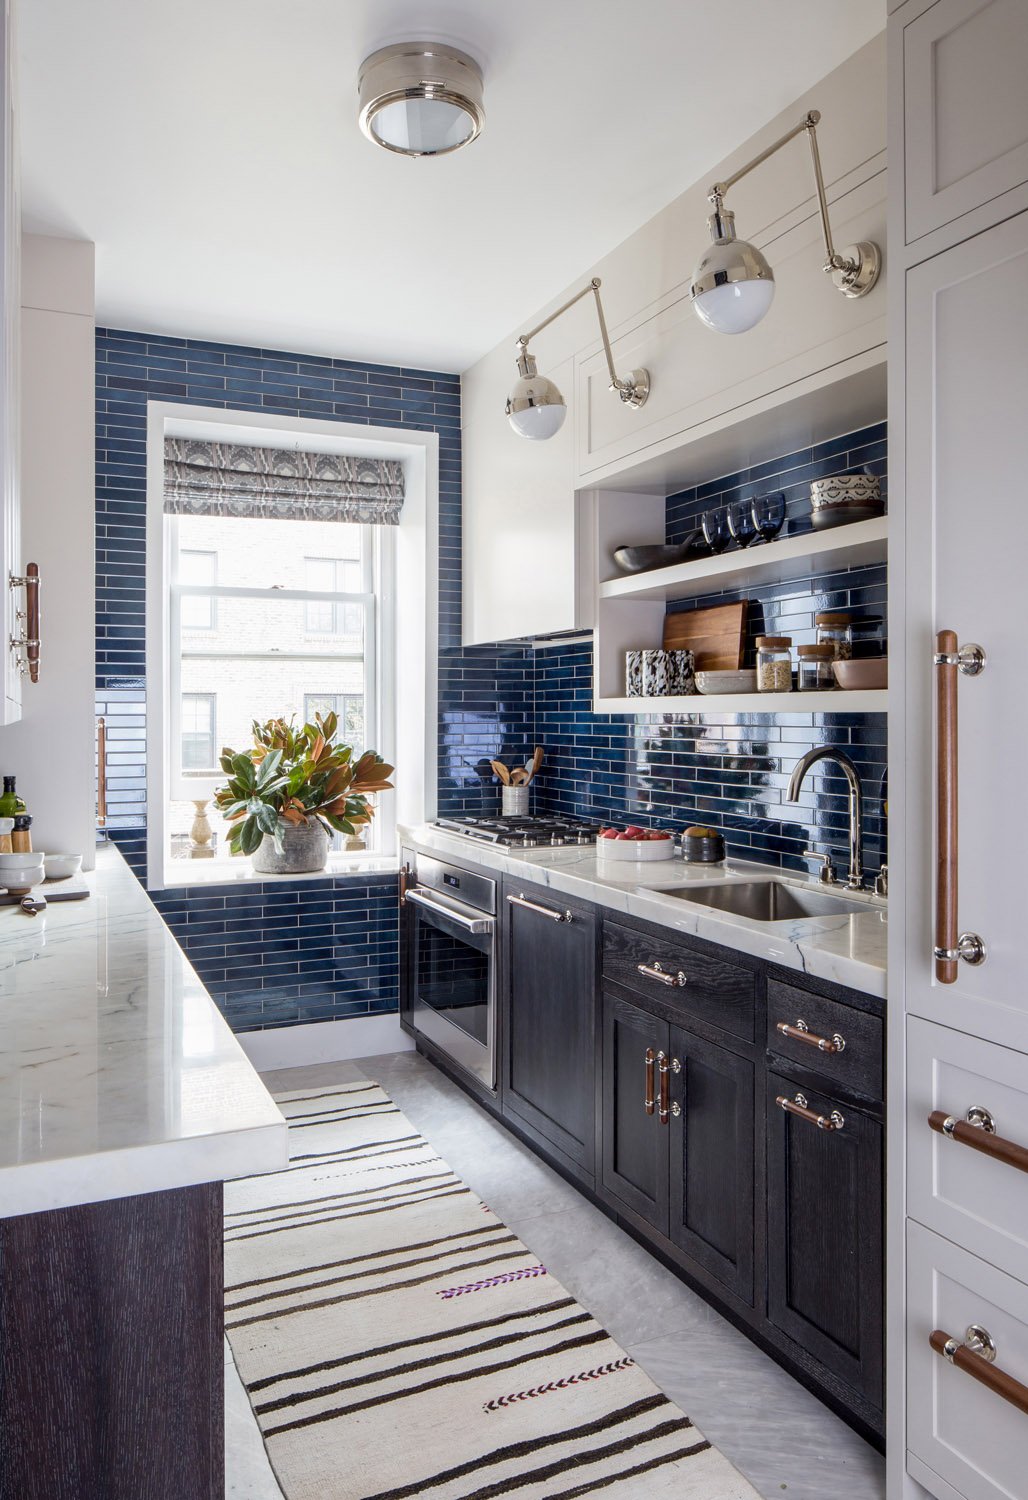 How long does a kitchen and bath renovation last